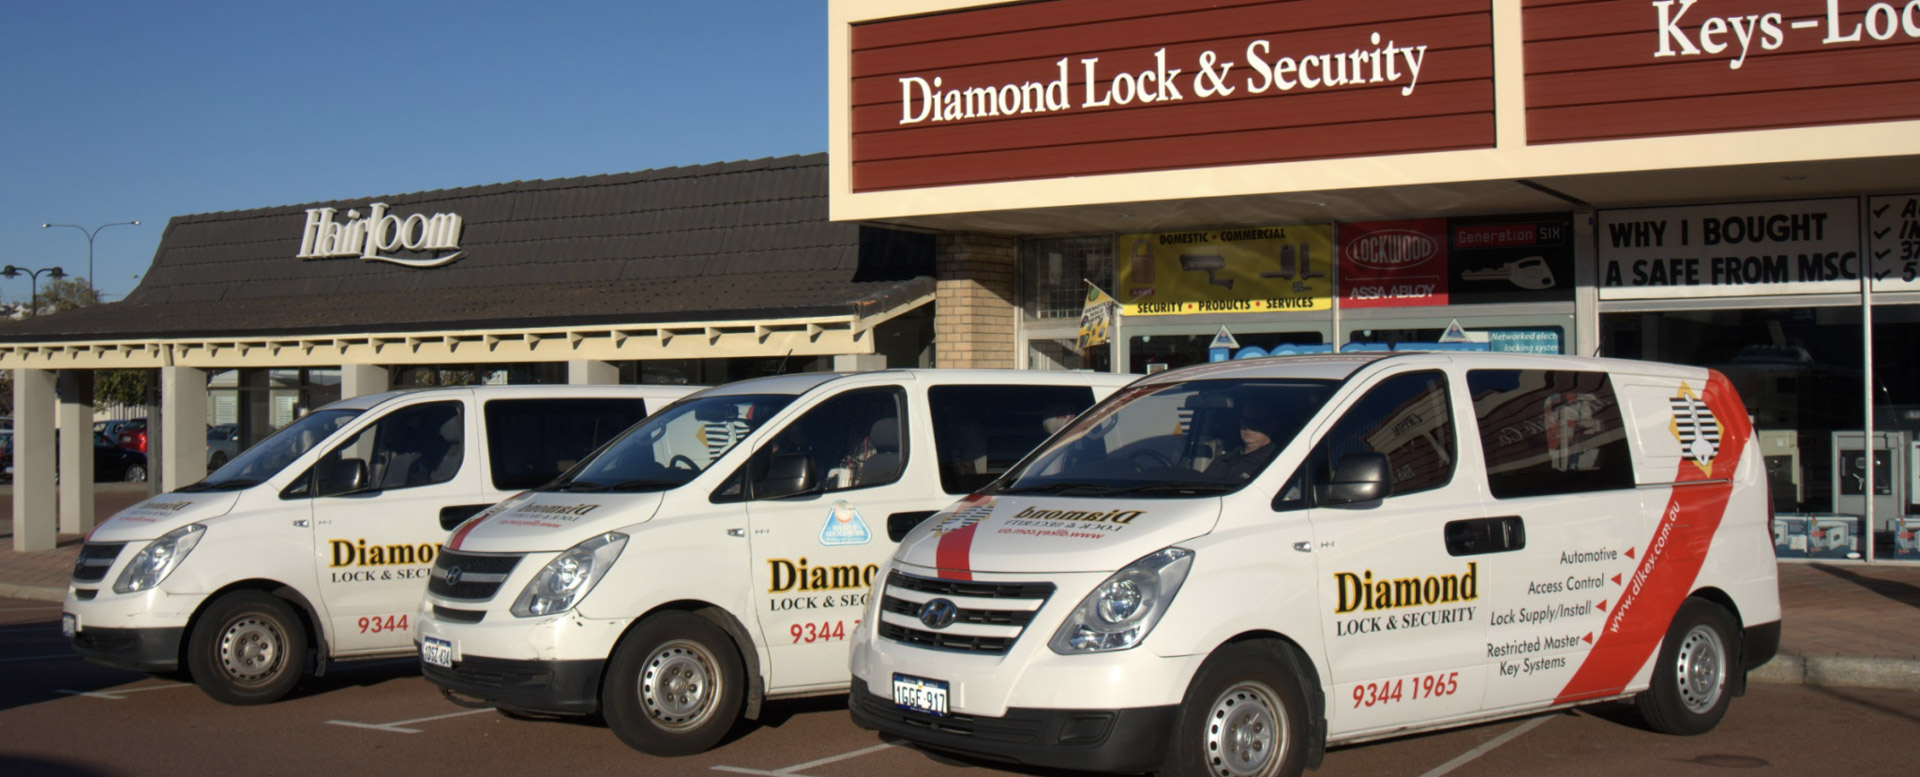 Diamond lock and security cars out the front of the venue.